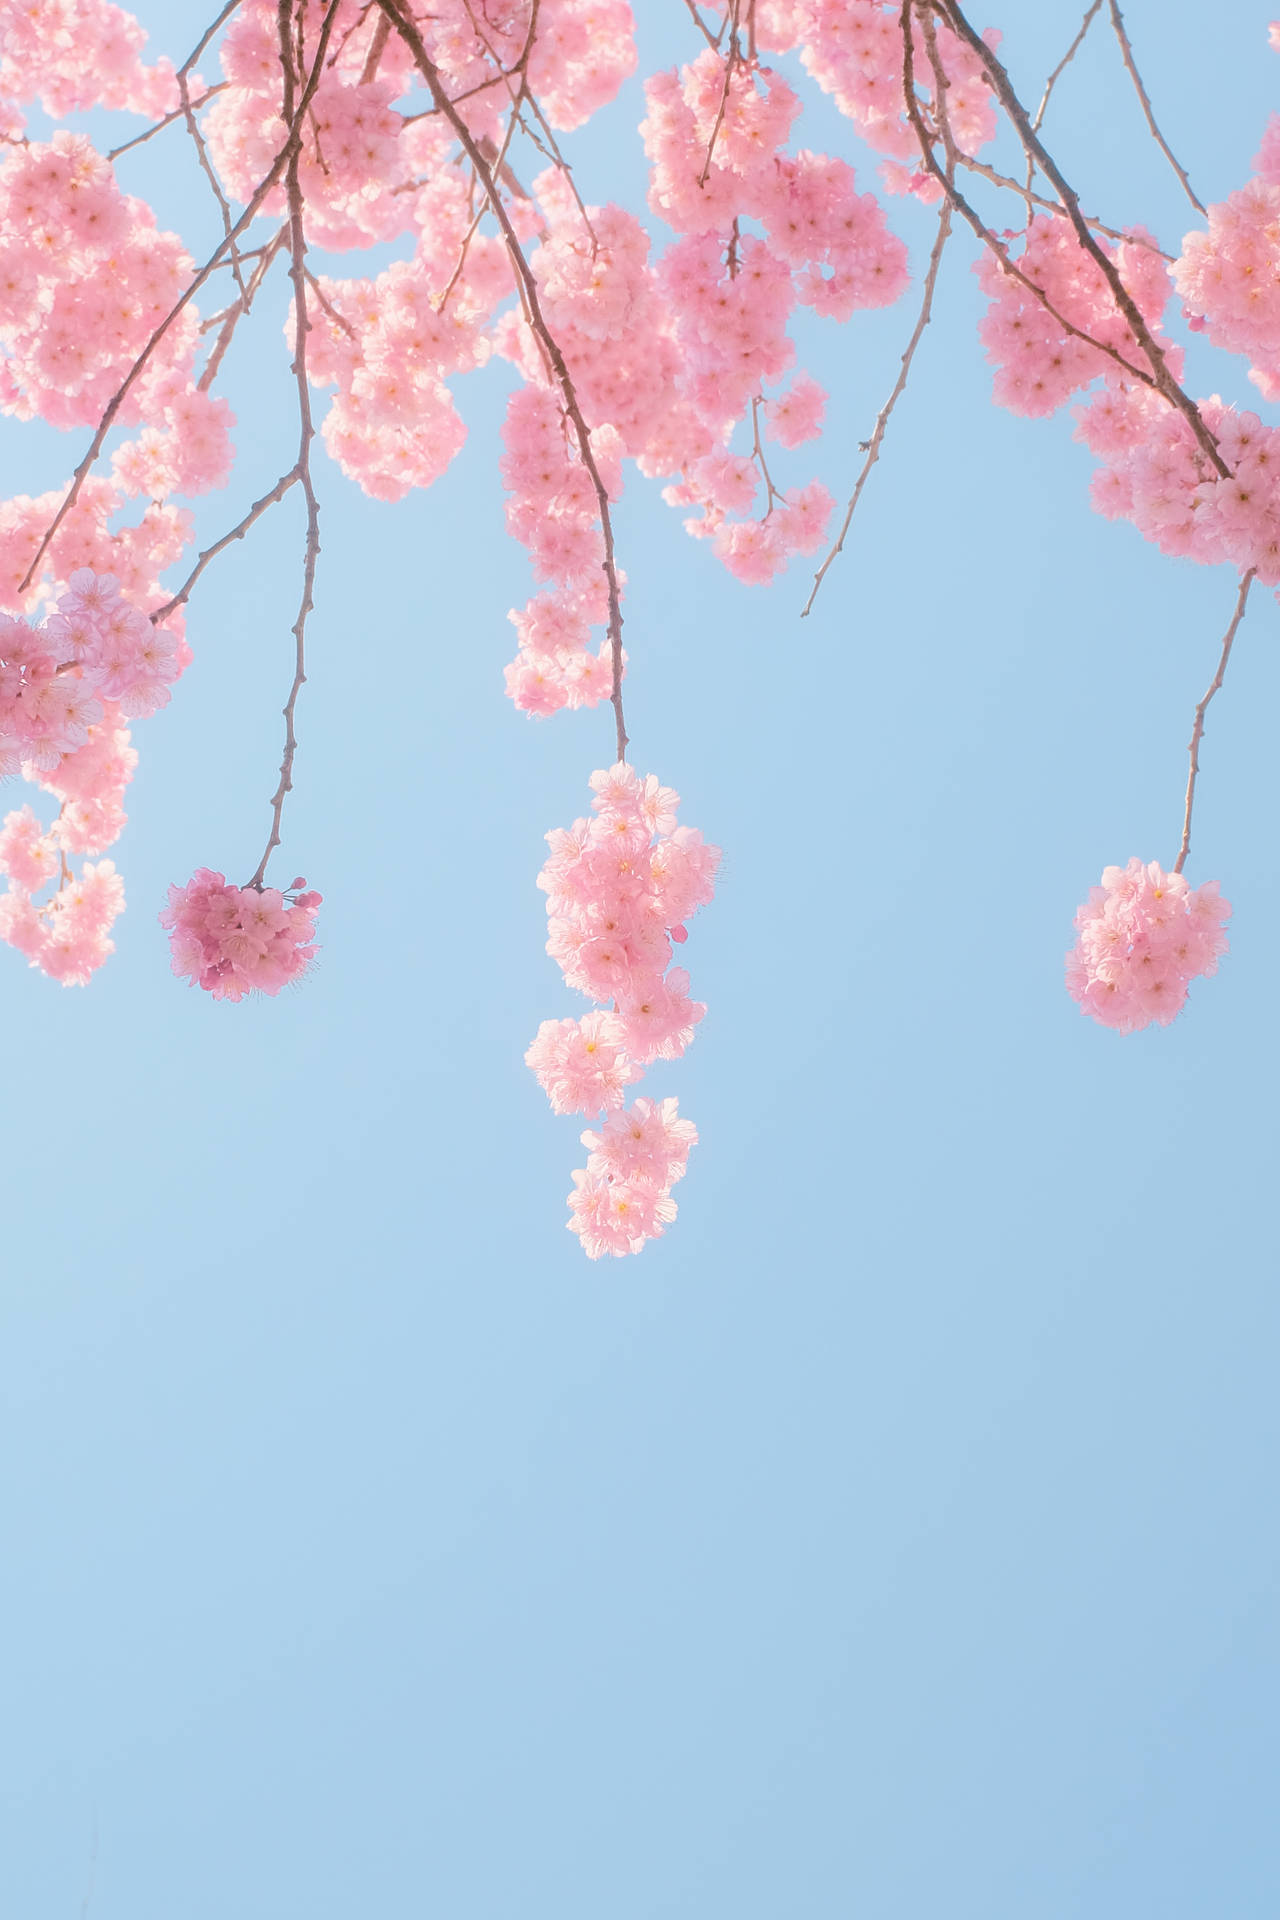 3541X5311 Cherry Blossom Wallpaper and Background